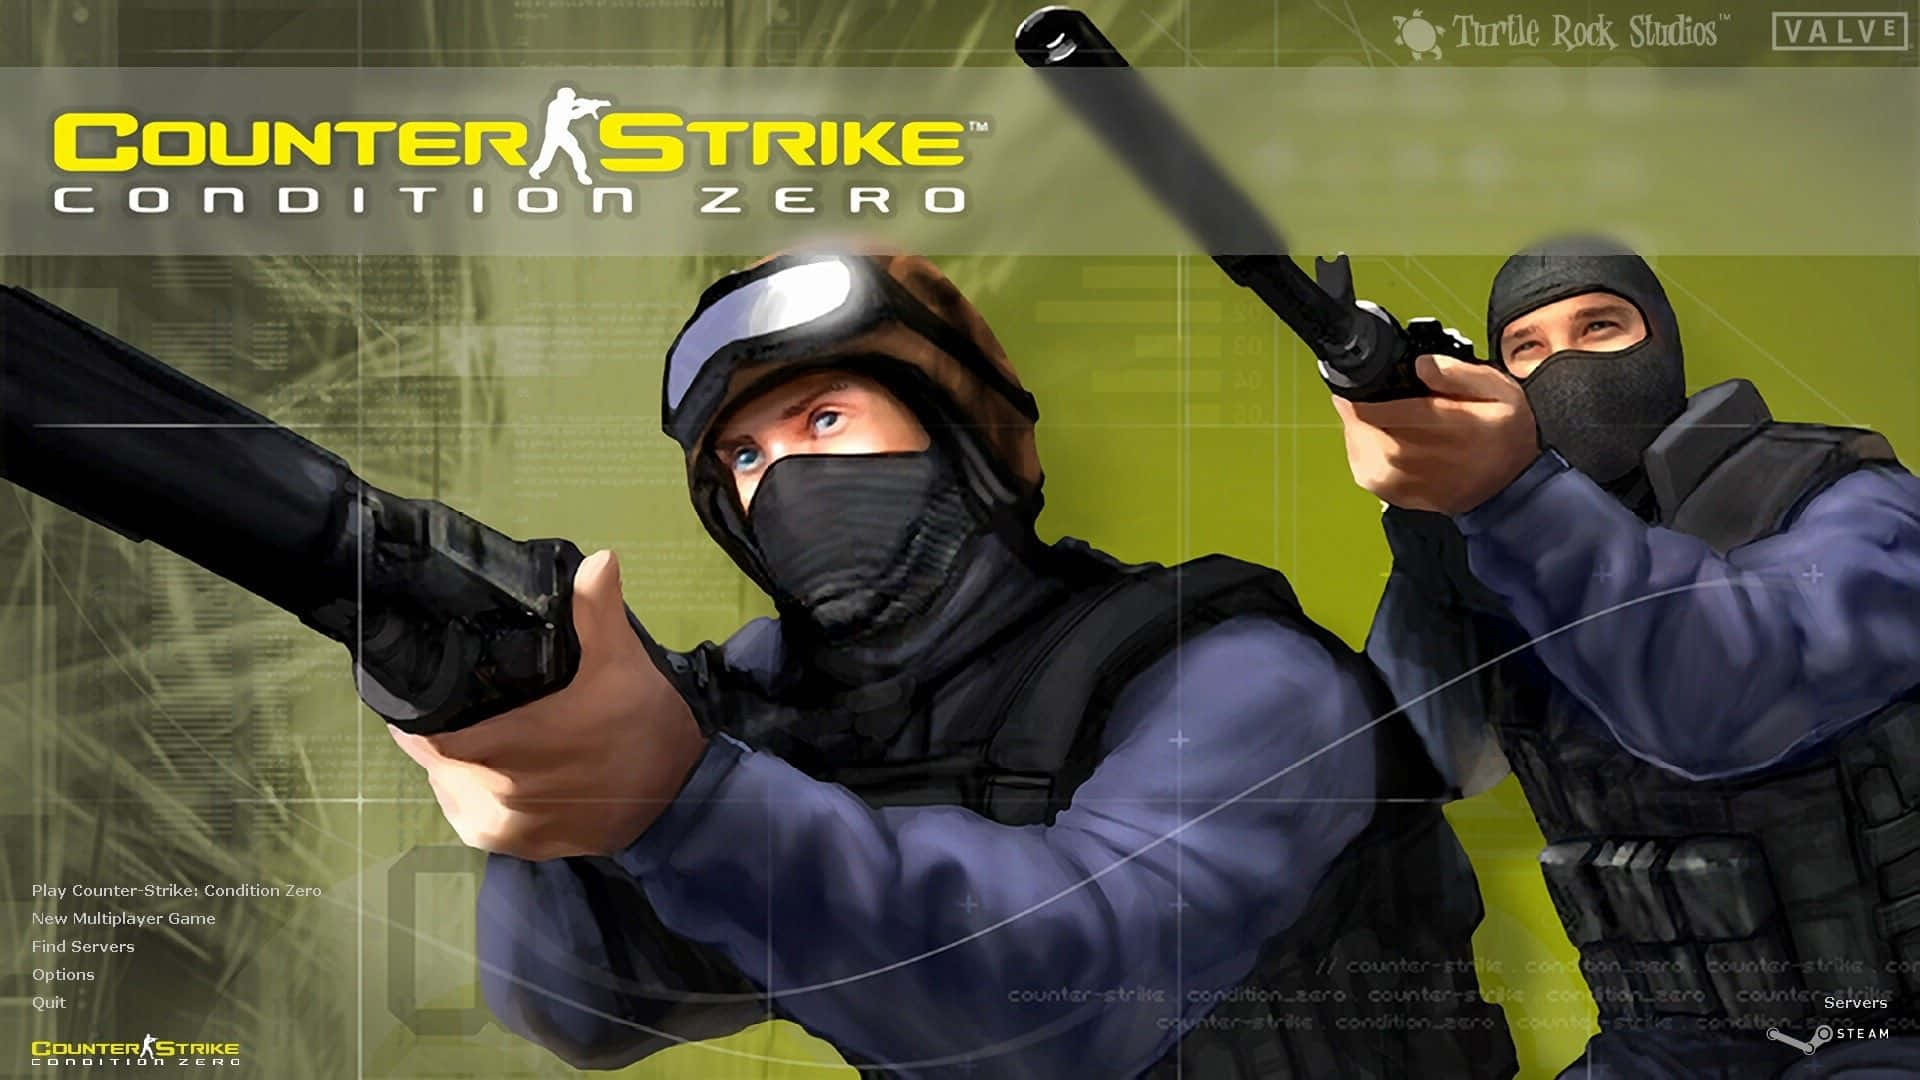 Play Counter-Strike and dominate the game! Wallpaper